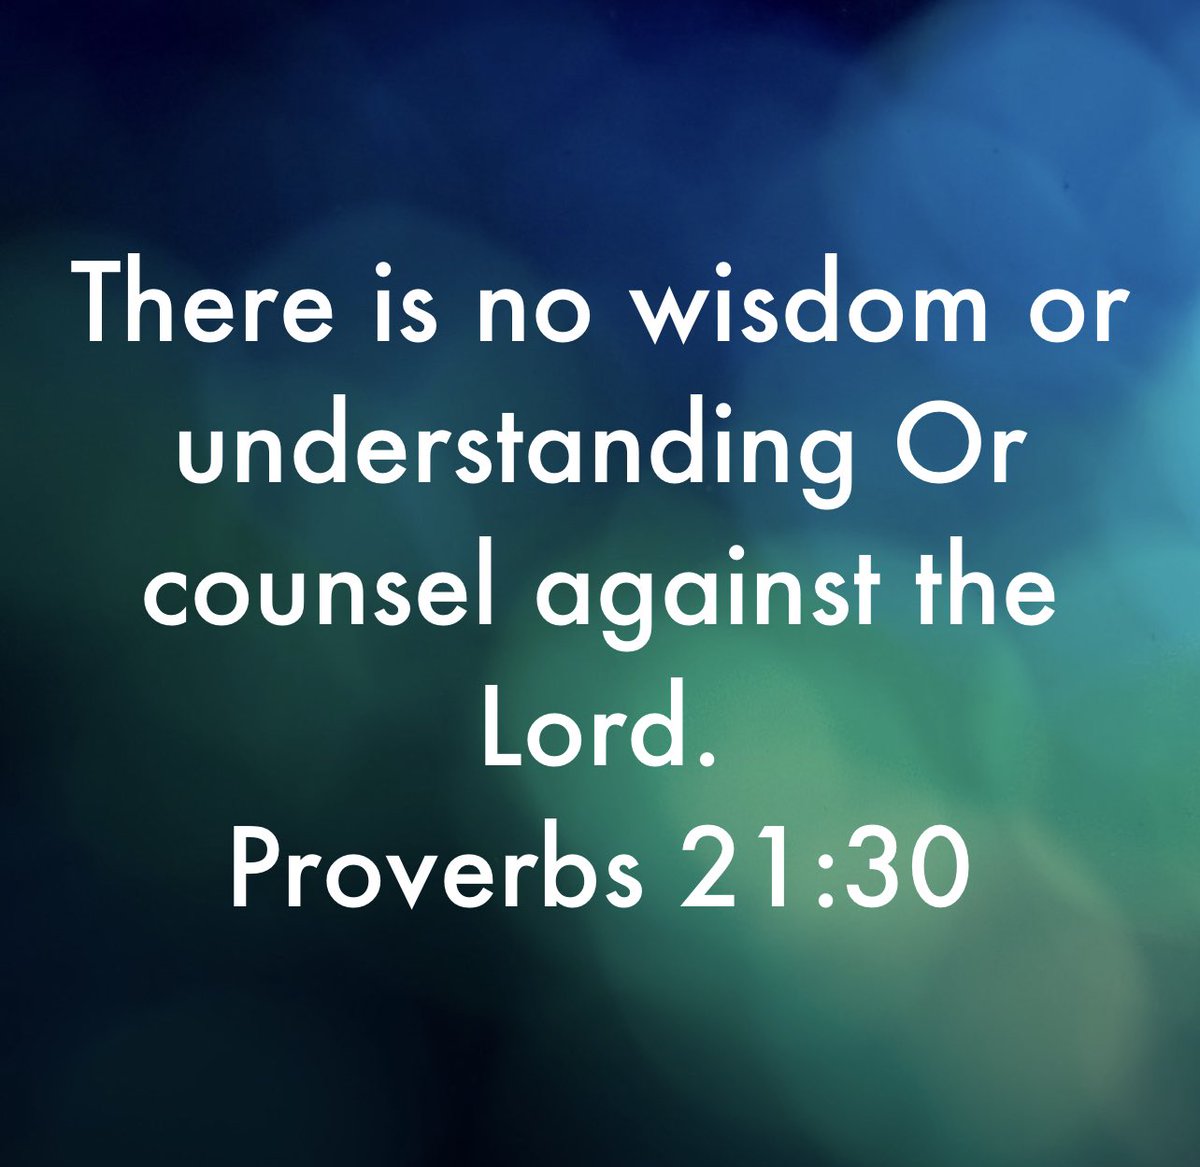 Today you will be faced with choices that sound wise, but remember if it contradicts the word of God, it is not wisdom. 😉😉😉
#wordsoflife